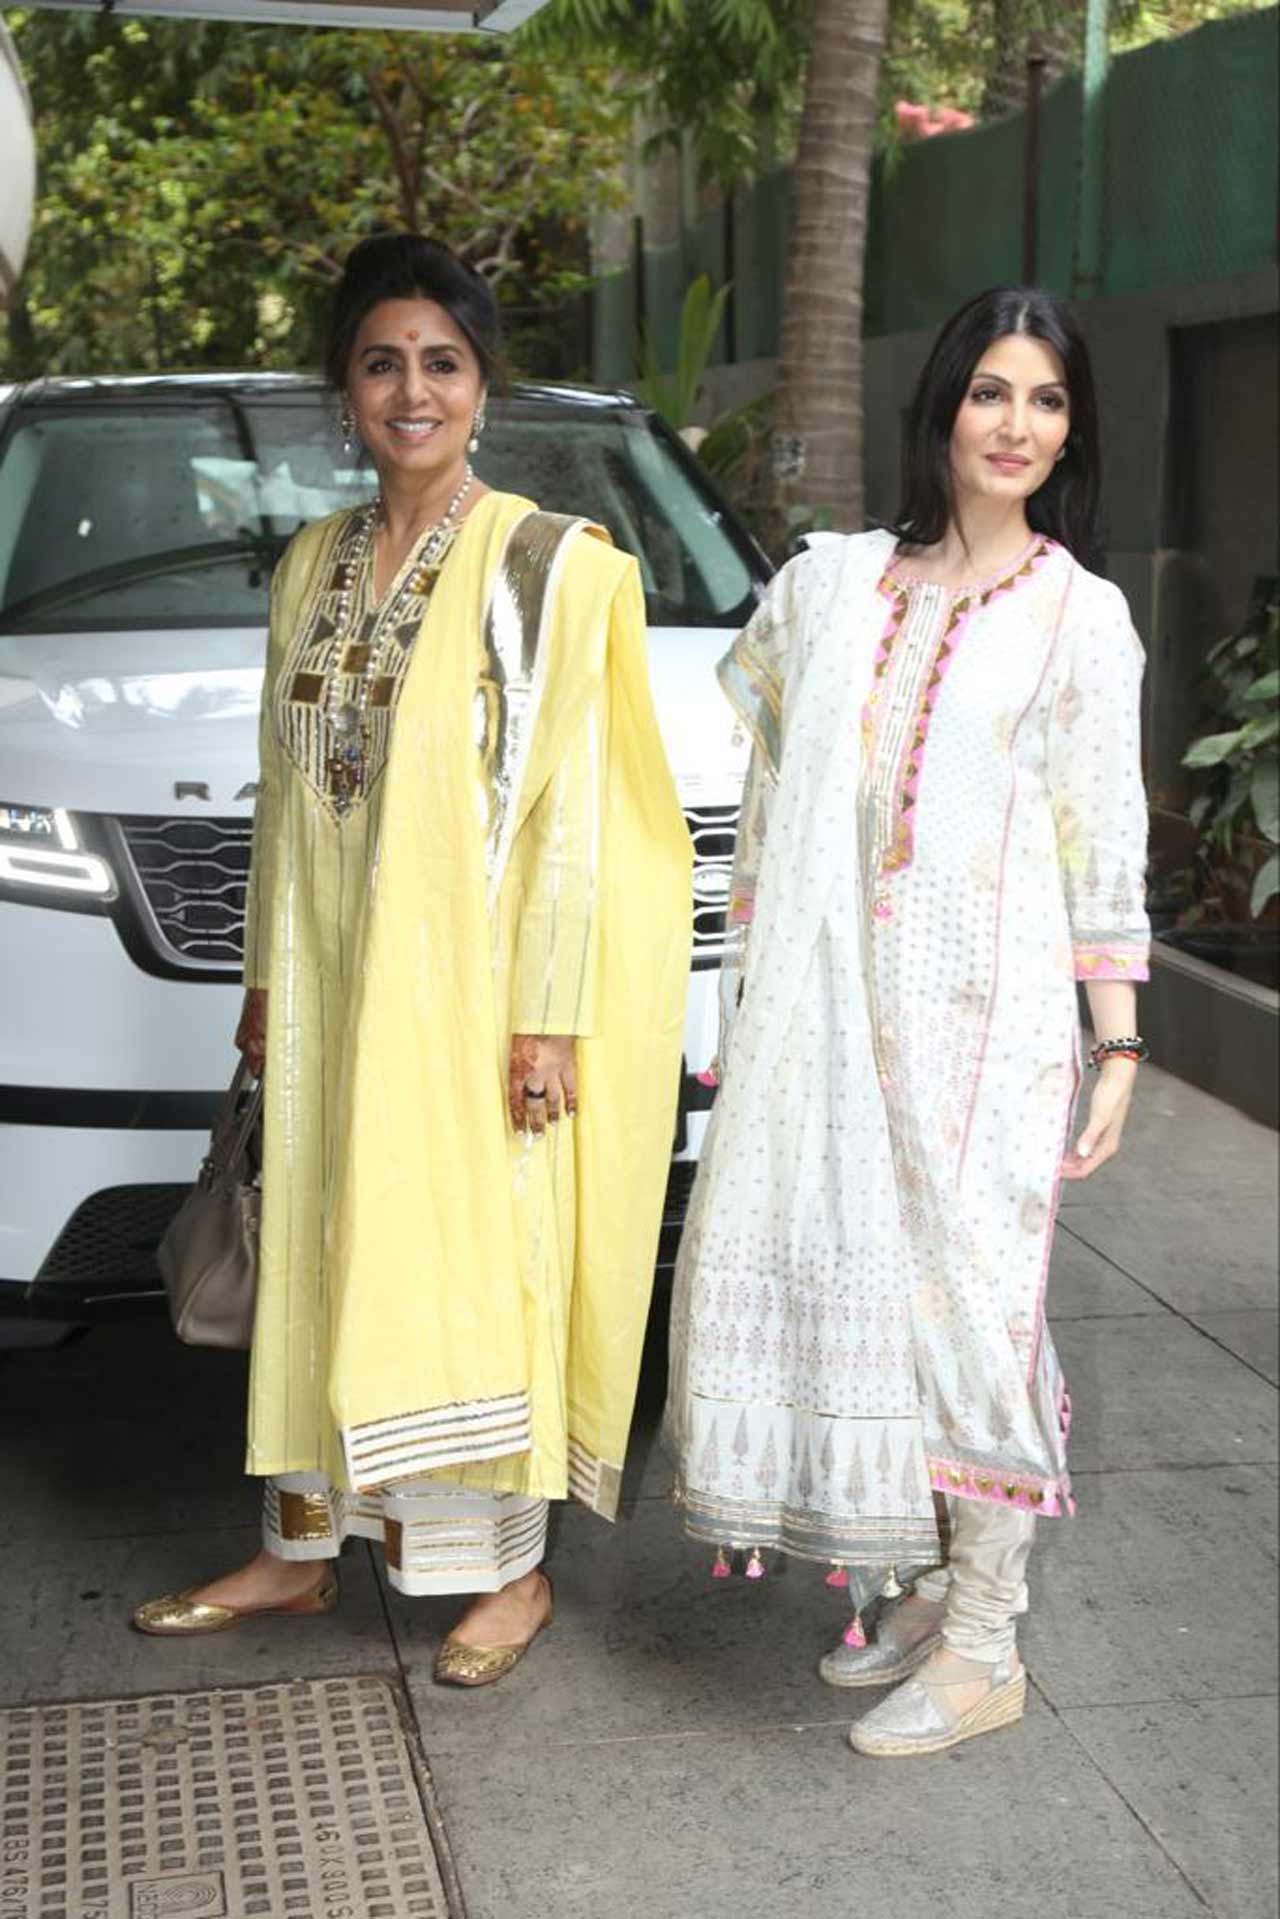 As the wedding festivities for tinsel town's favourite couple, Ranbir Kapoor and Alia Bhatt, continue on Thursday, the bride's mother Soni Razdan and sister Shaheen Bhatt were spotted arriving at the groom's residence.